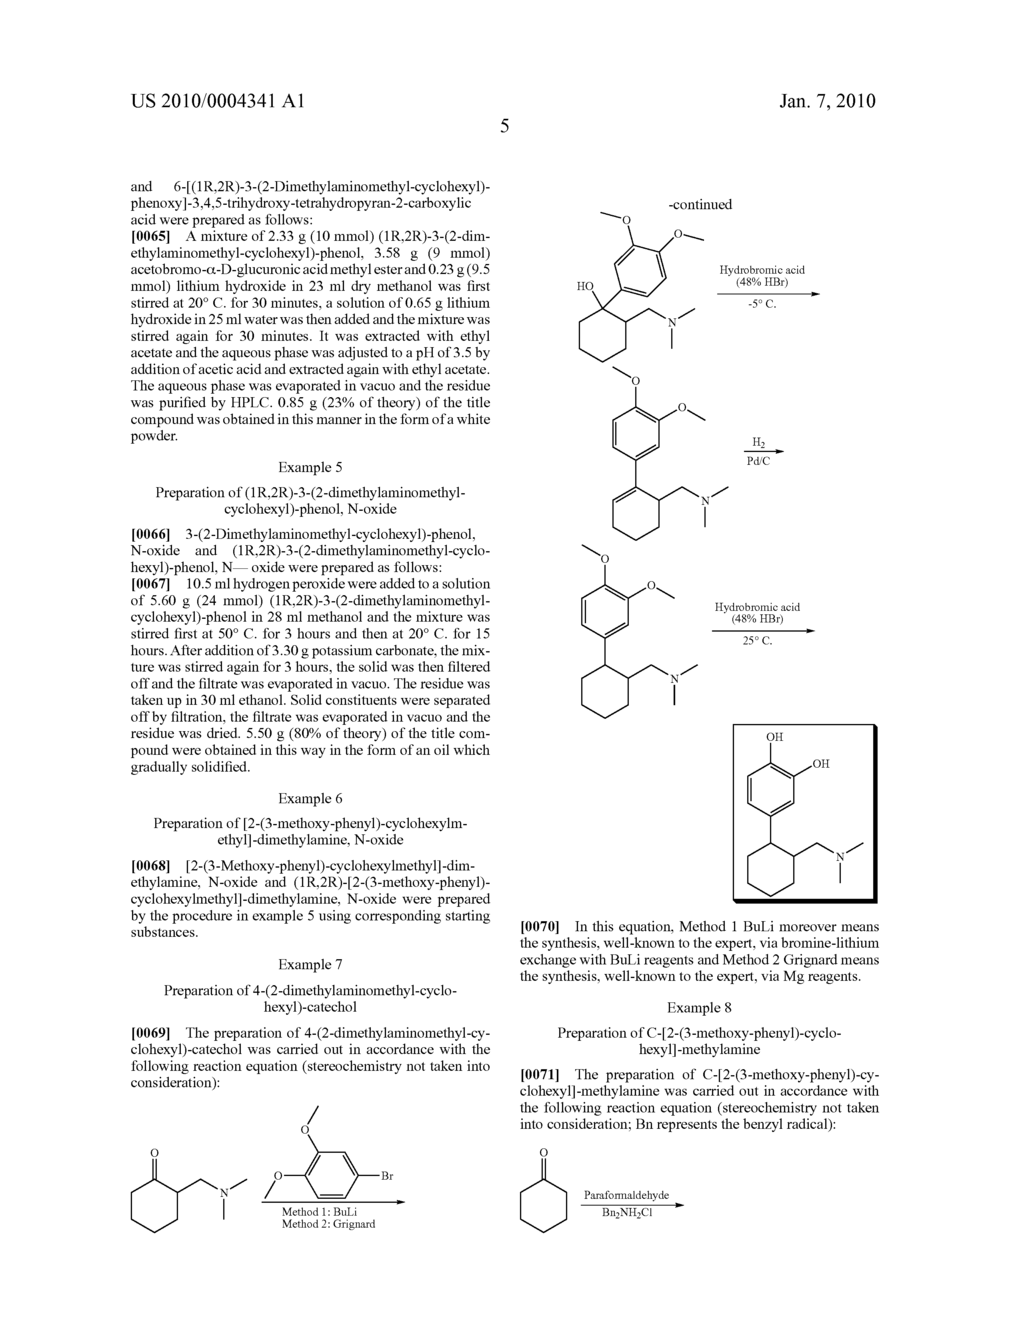 C-(2-Phenyl-Cyclohexyl)-Methylamine Compounds for Therapy of Fibromyalgia - diagram, schematic, and image 06